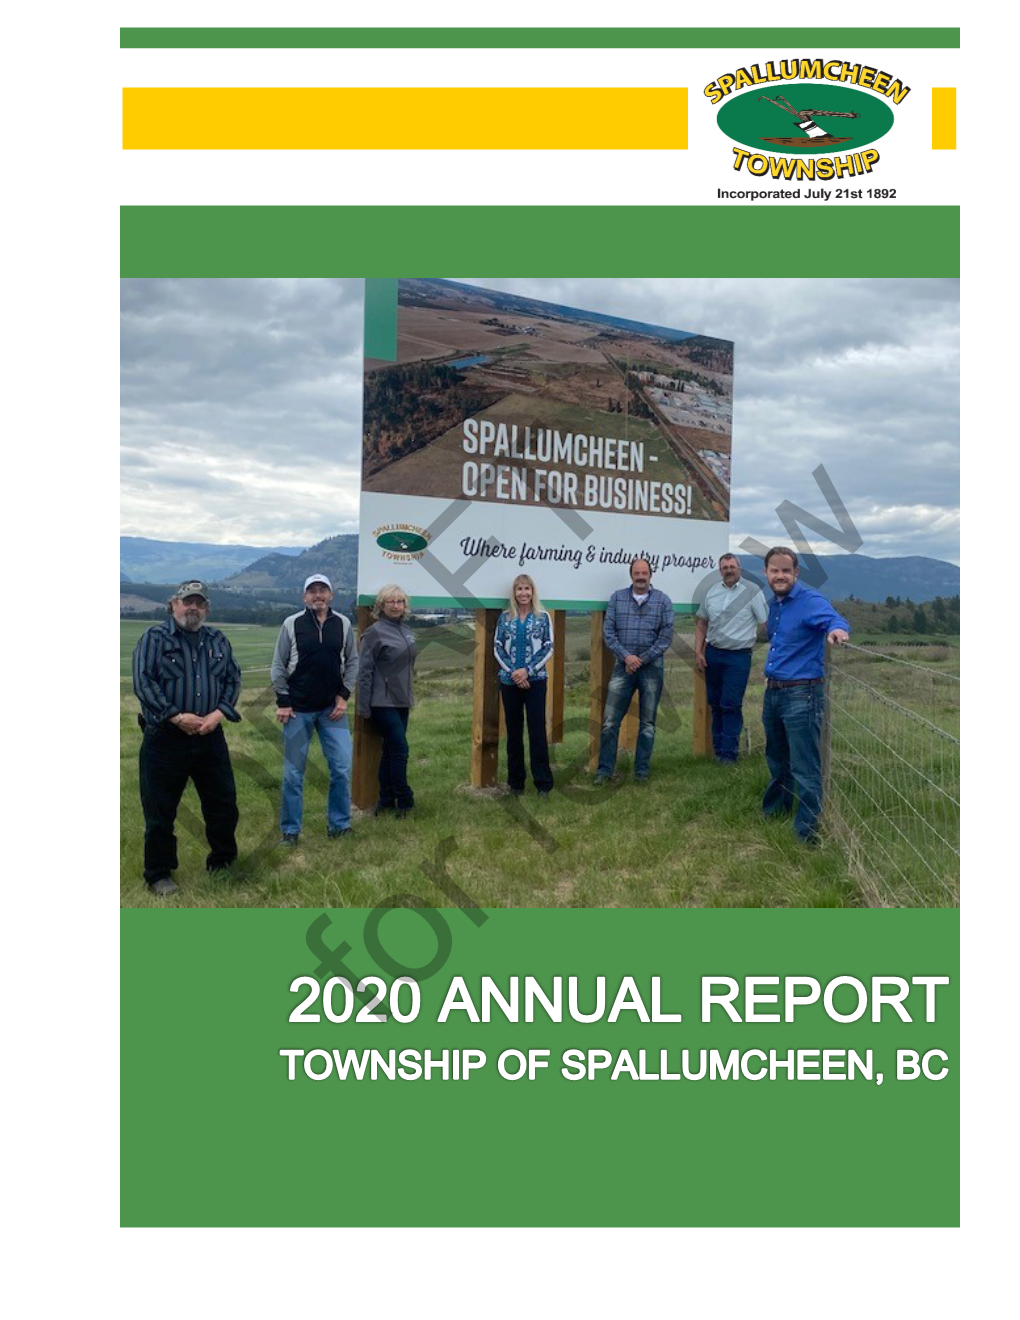 Township of Spallumcheen Annual Report